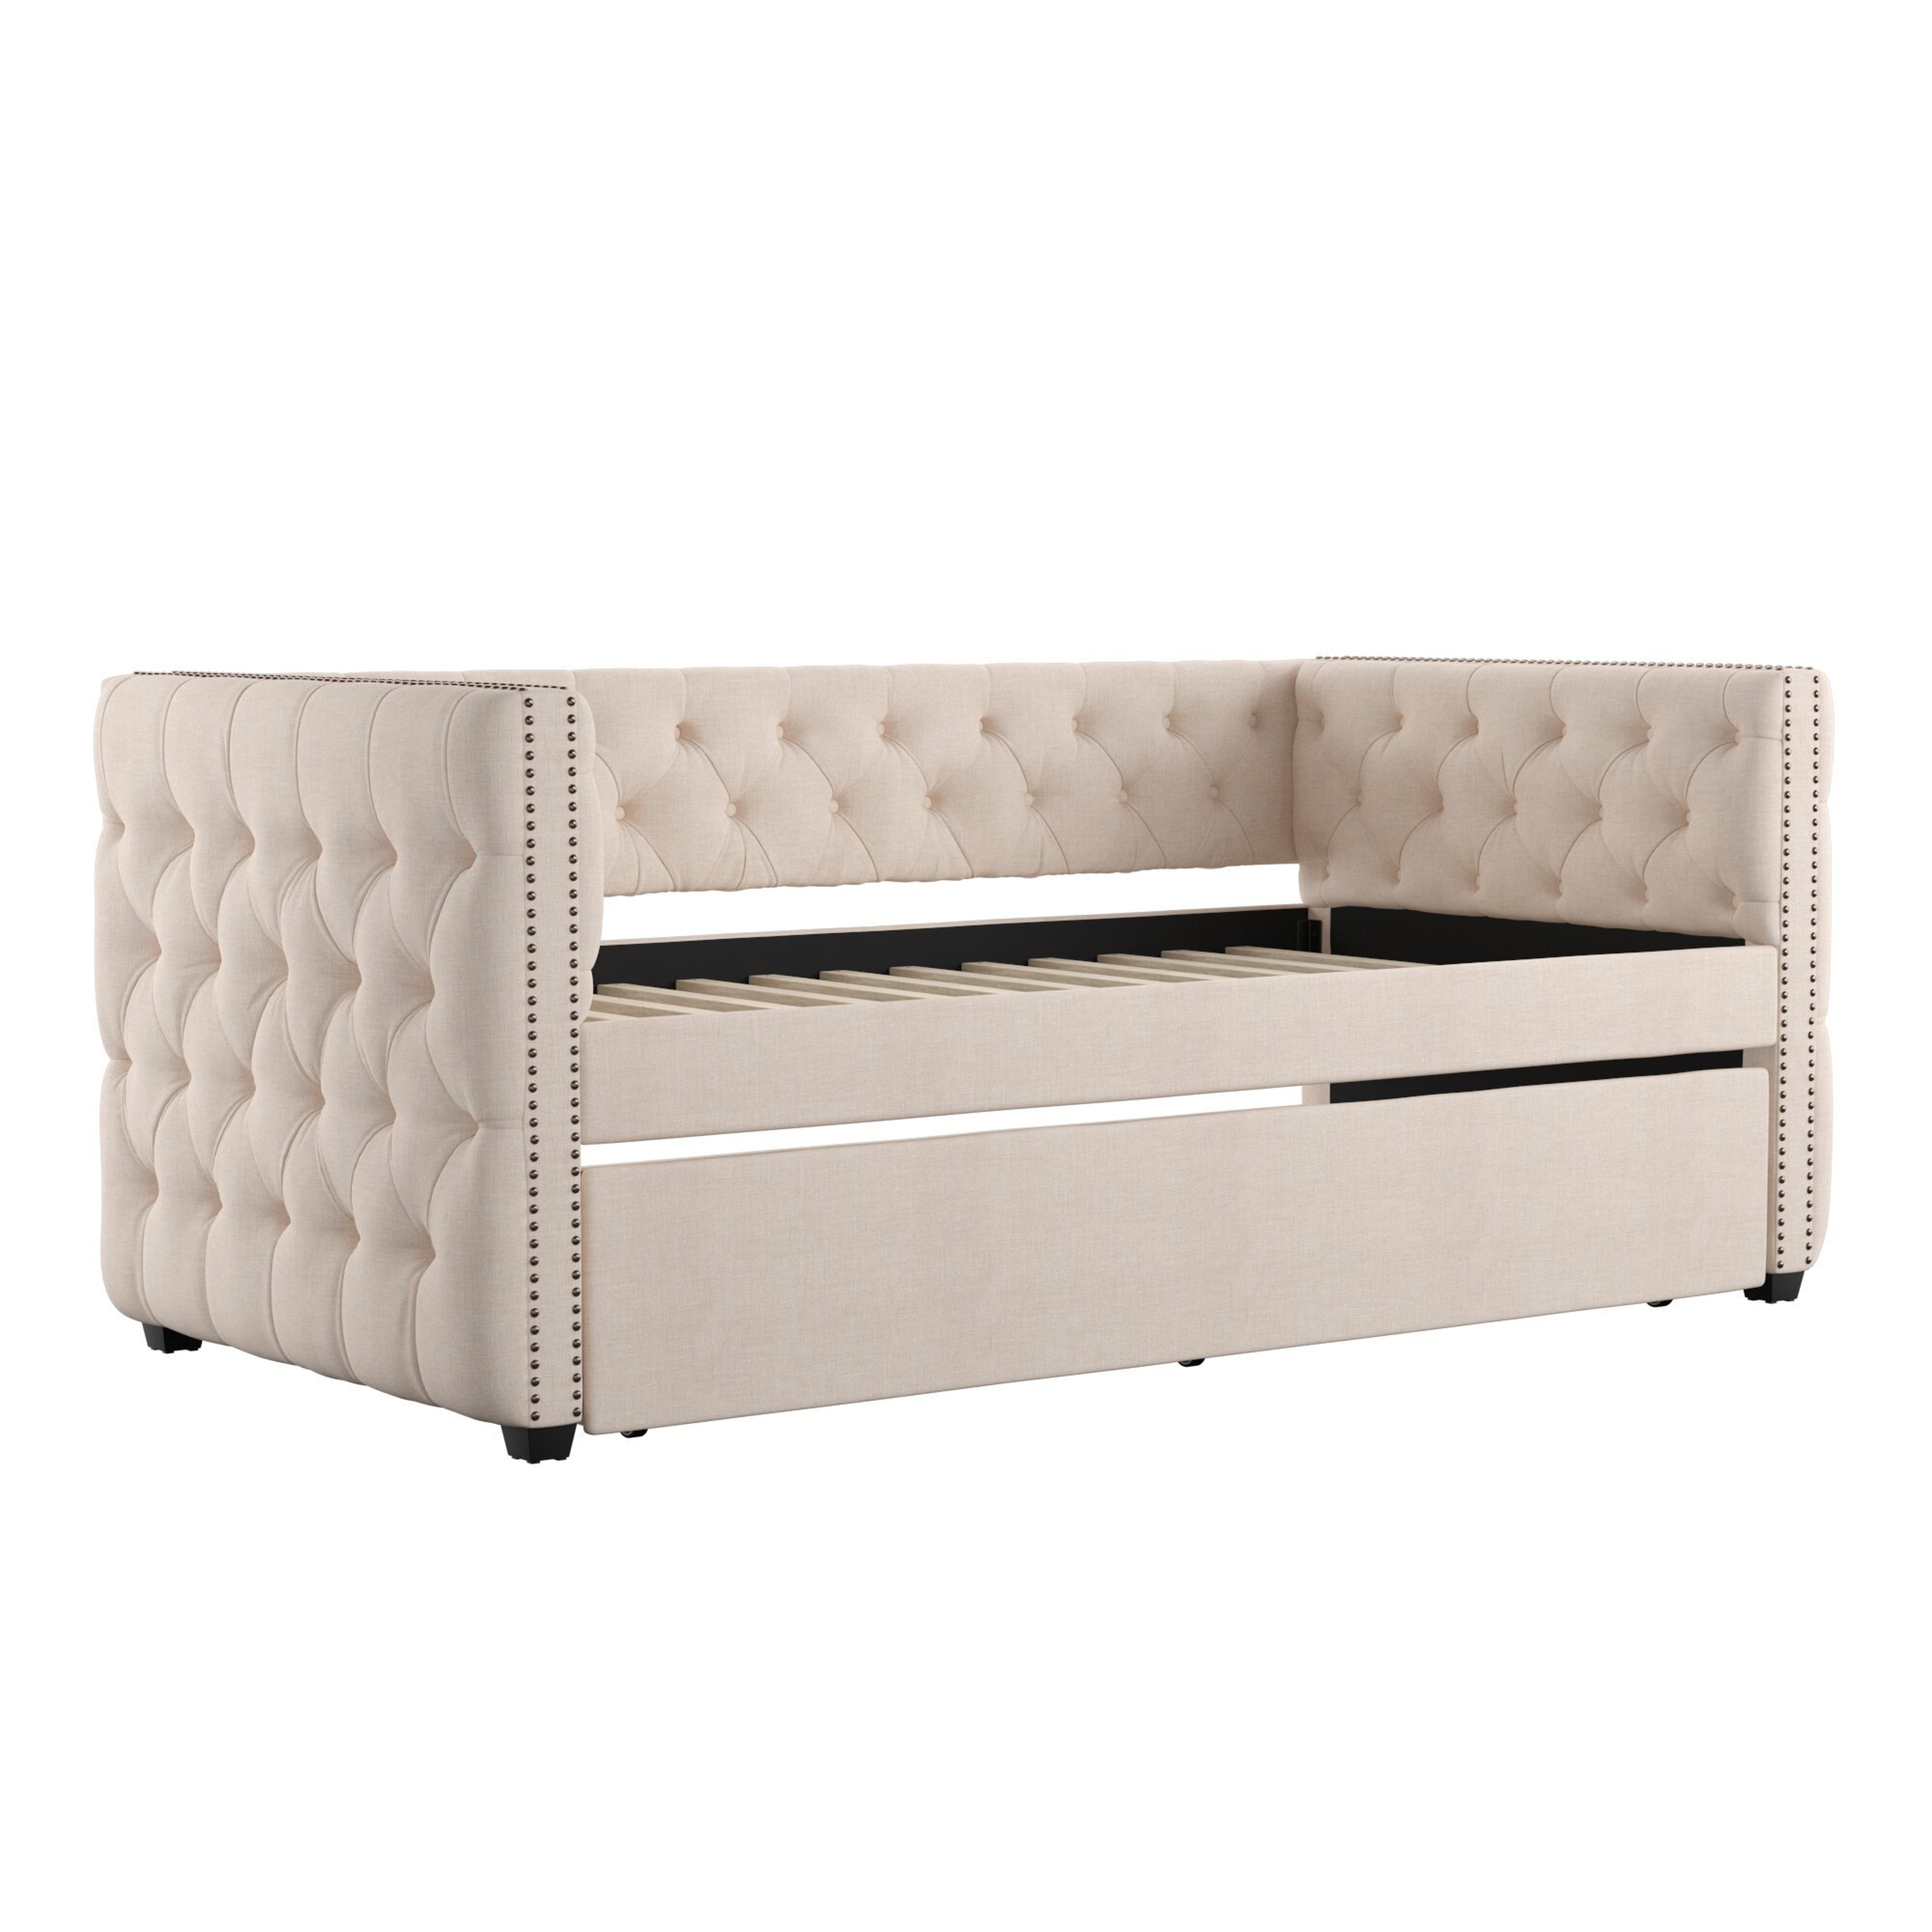 Ghislain Twin Daybed with Trundle - beige - Wayfair